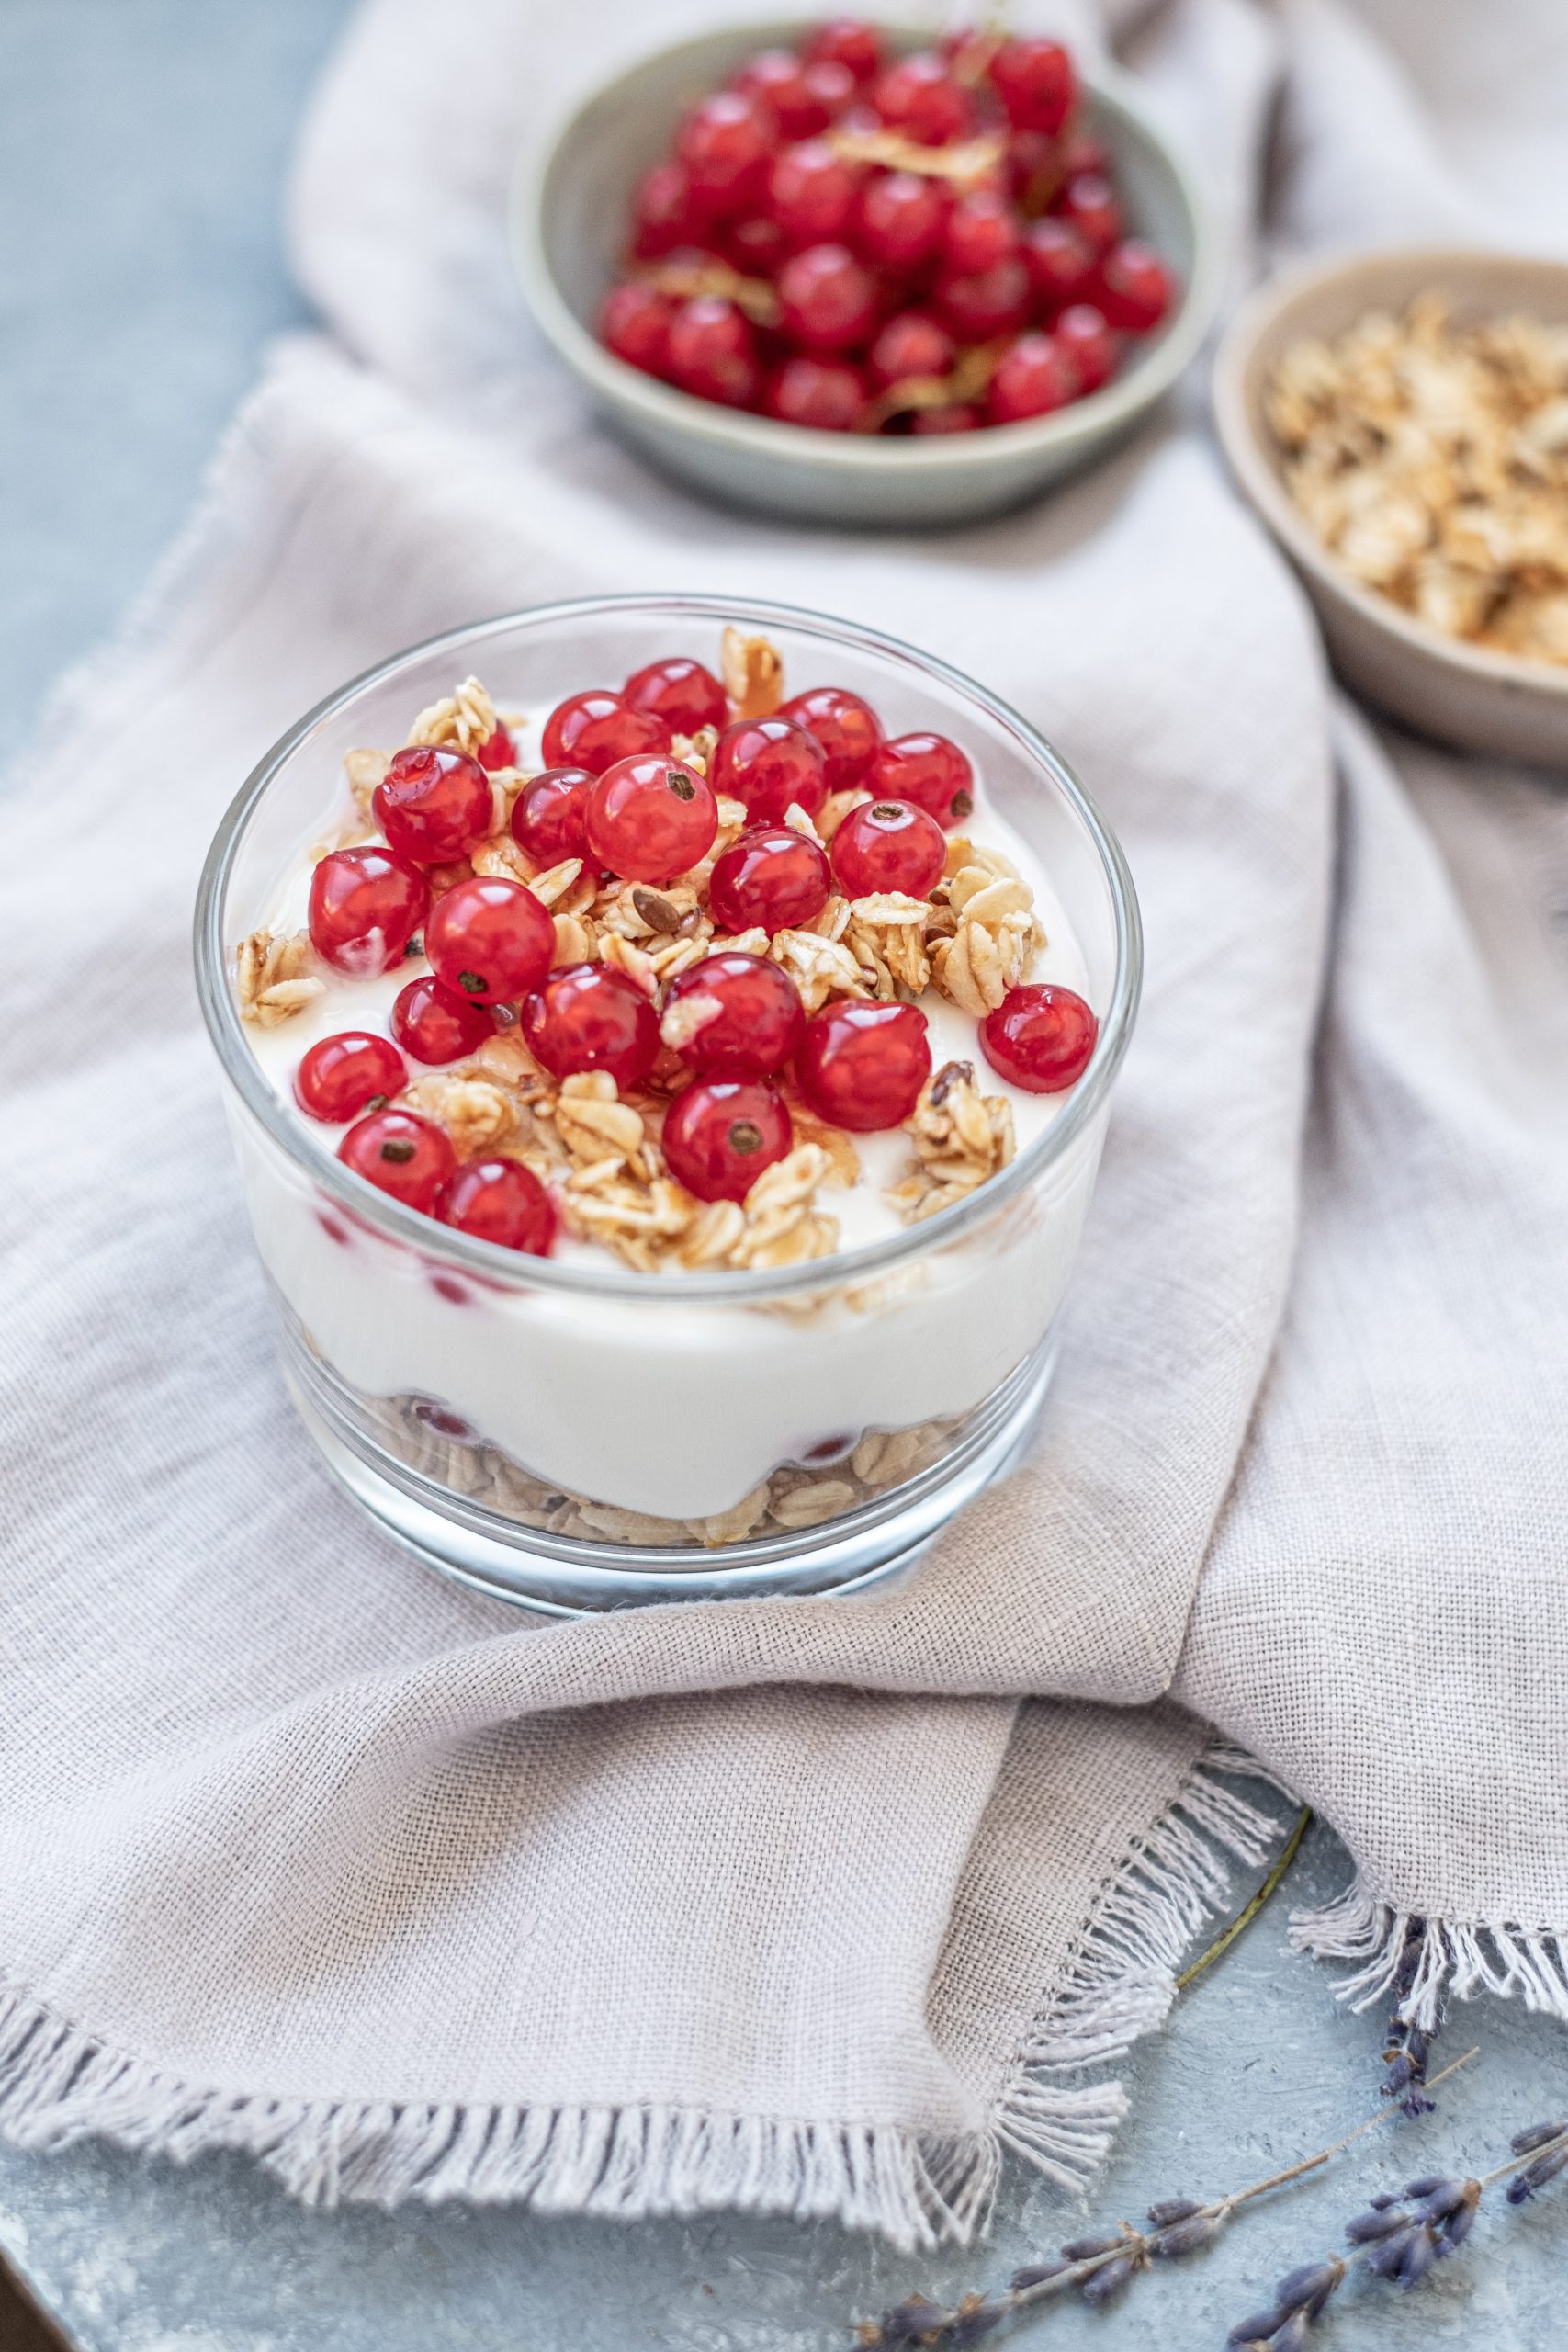 Skyr with Red Currant Berries